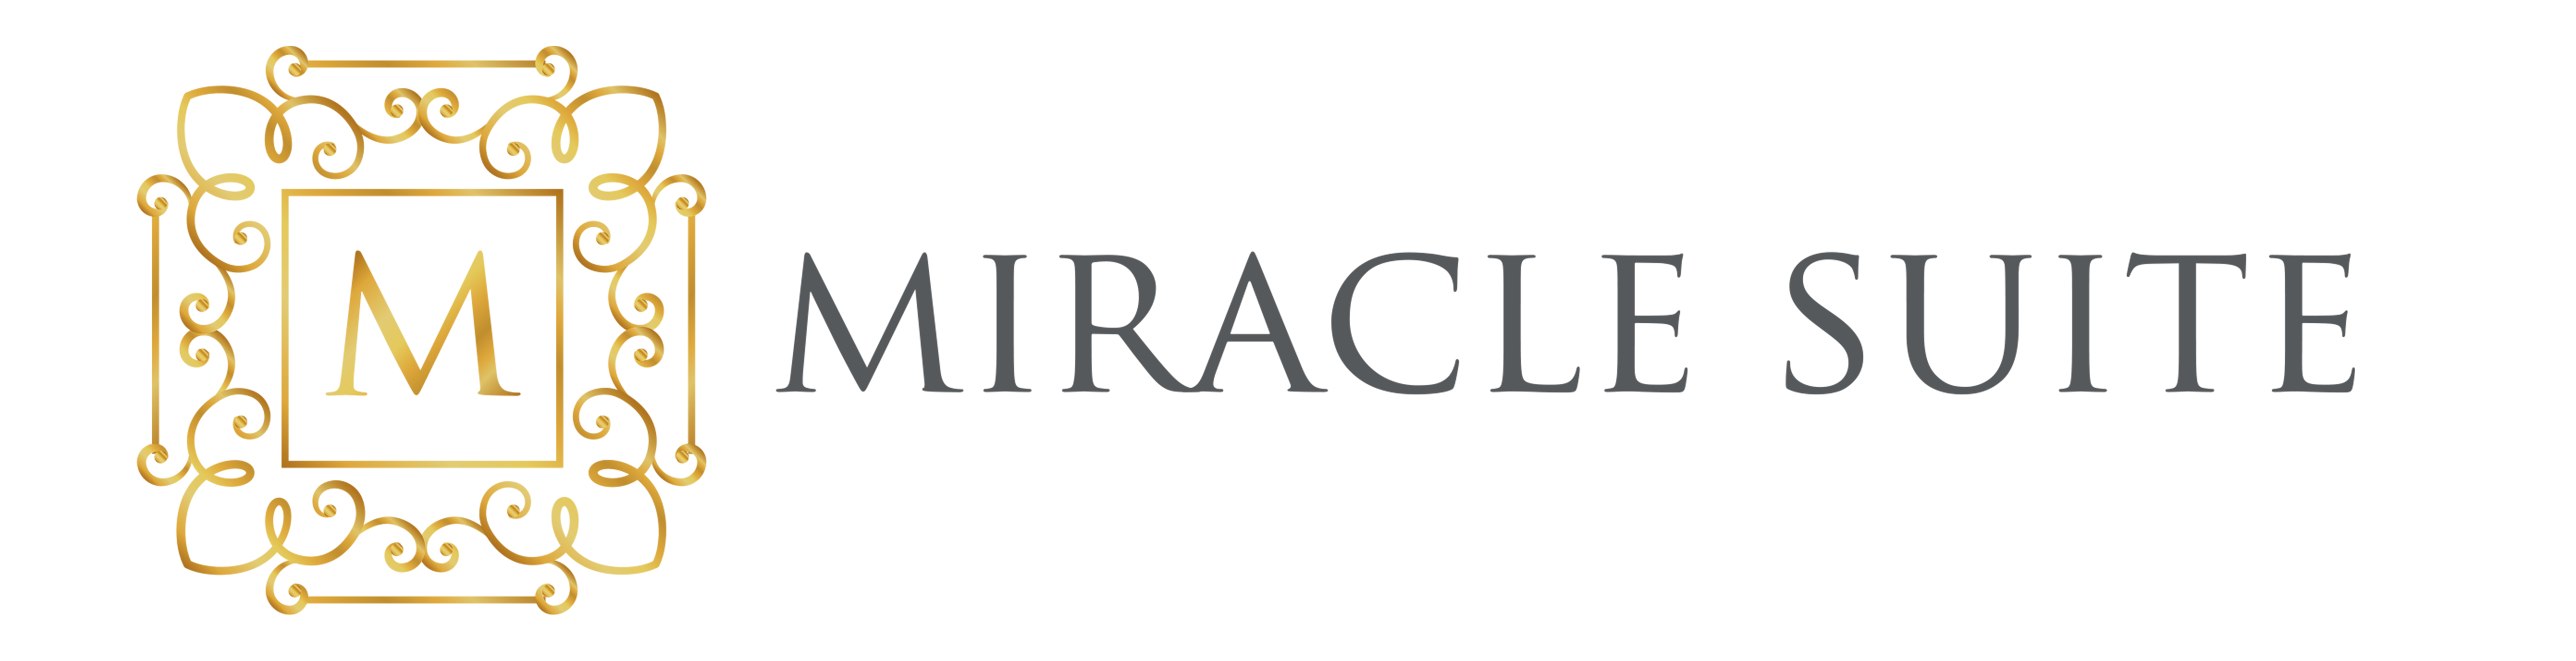 Miracle Suite